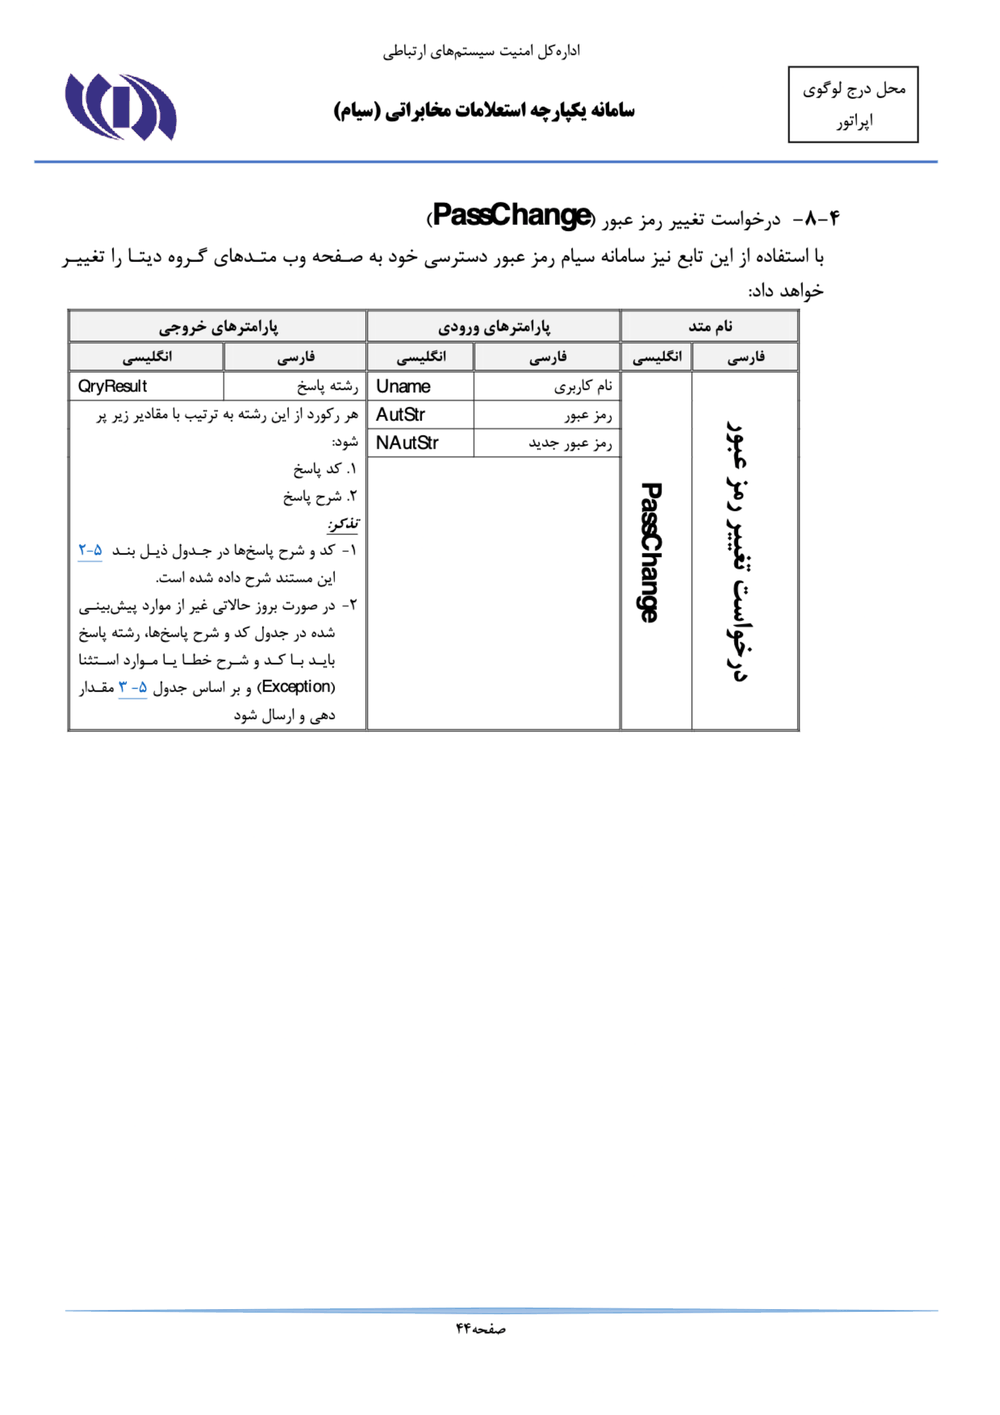 Page 44 from Iran’s SIAM Manual in Persian for Tracking and Controlling Mobile Phones